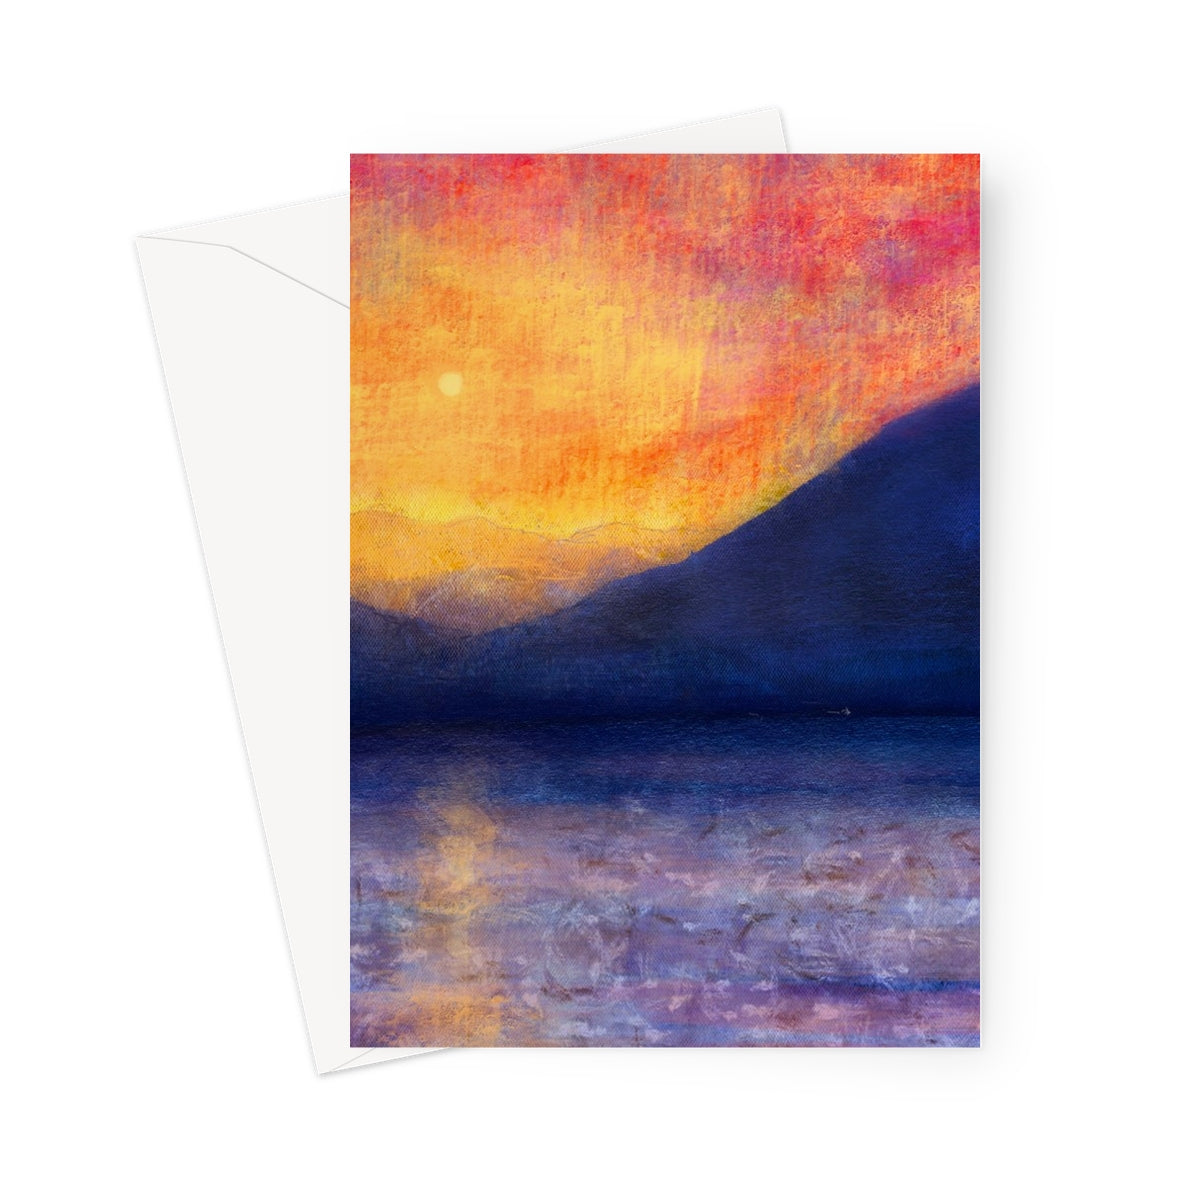 Sunset Approaching Mull Art Gifts Greeting Card-Greetings Cards-Hebridean Islands Art Gallery-5"x7"-10 Cards-Paintings, Prints, Homeware, Art Gifts From Scotland By Scottish Artist Kevin Hunter